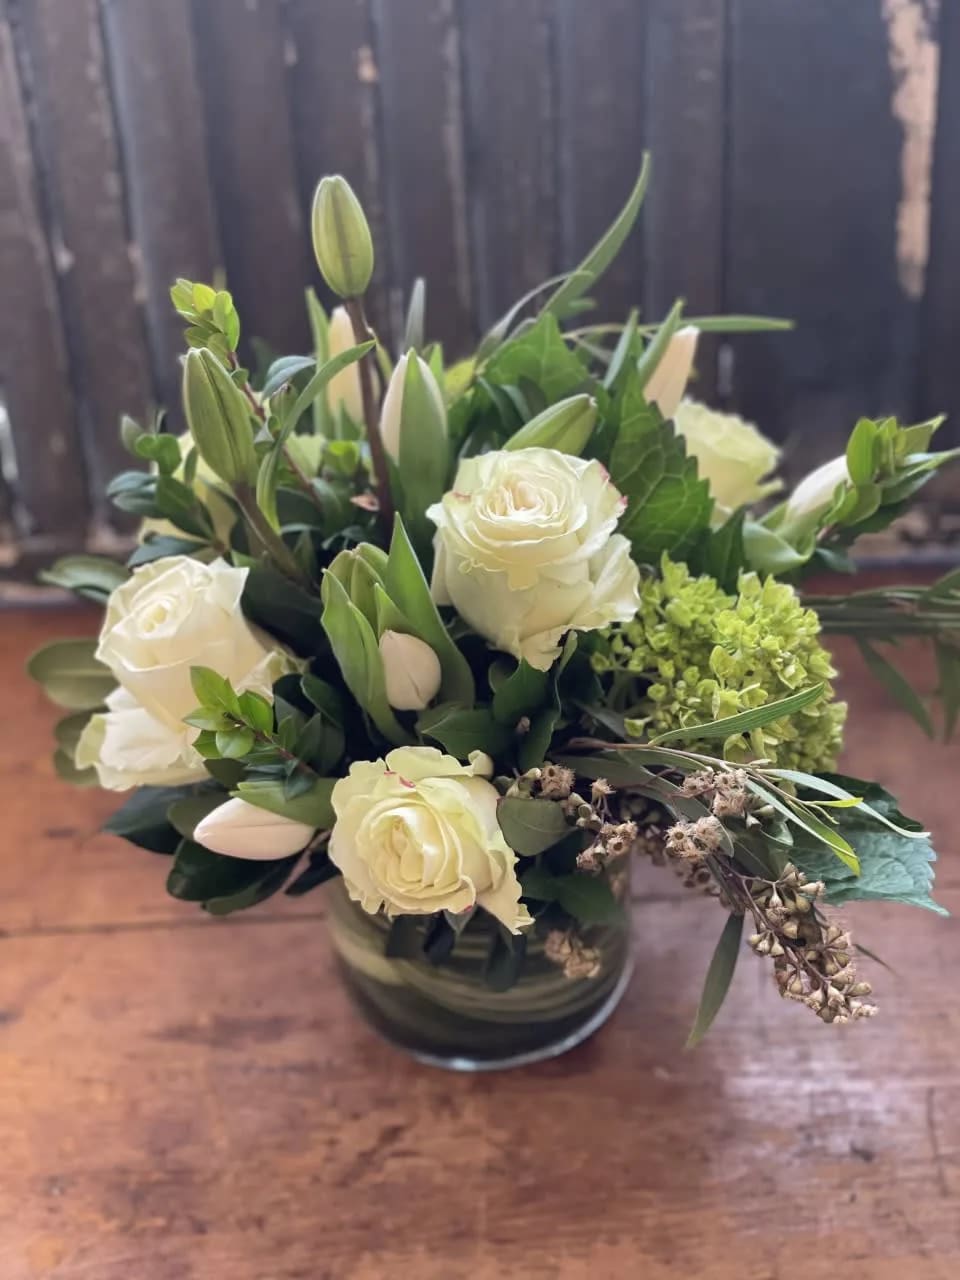 A variety of green and white flowers in a short clear vase.